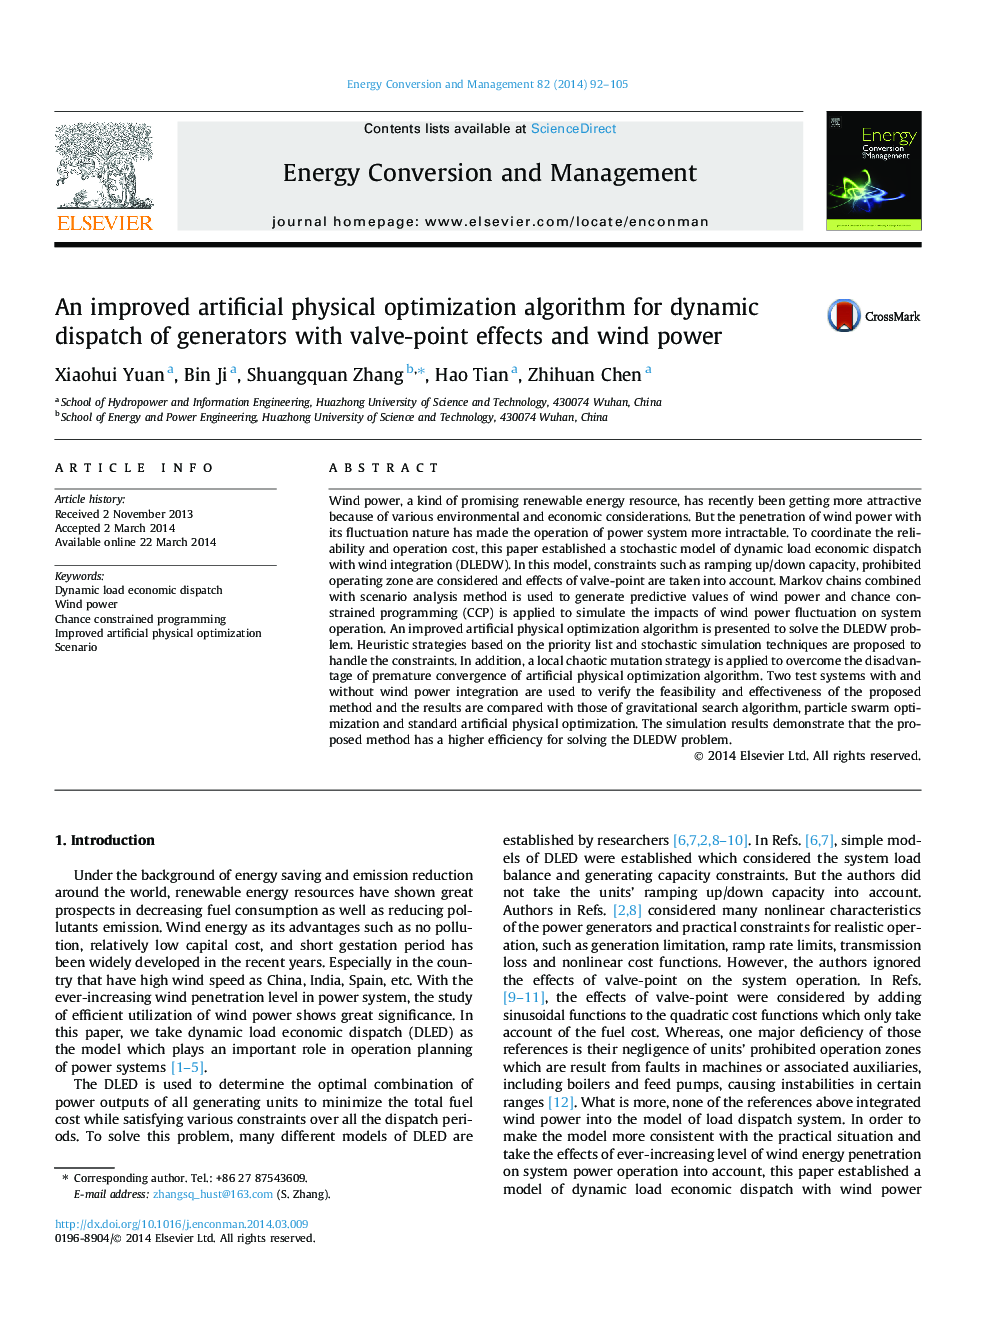 An improved artificial physical optimization algorithm for dynamic dispatch of generators with valve-point effects and wind power